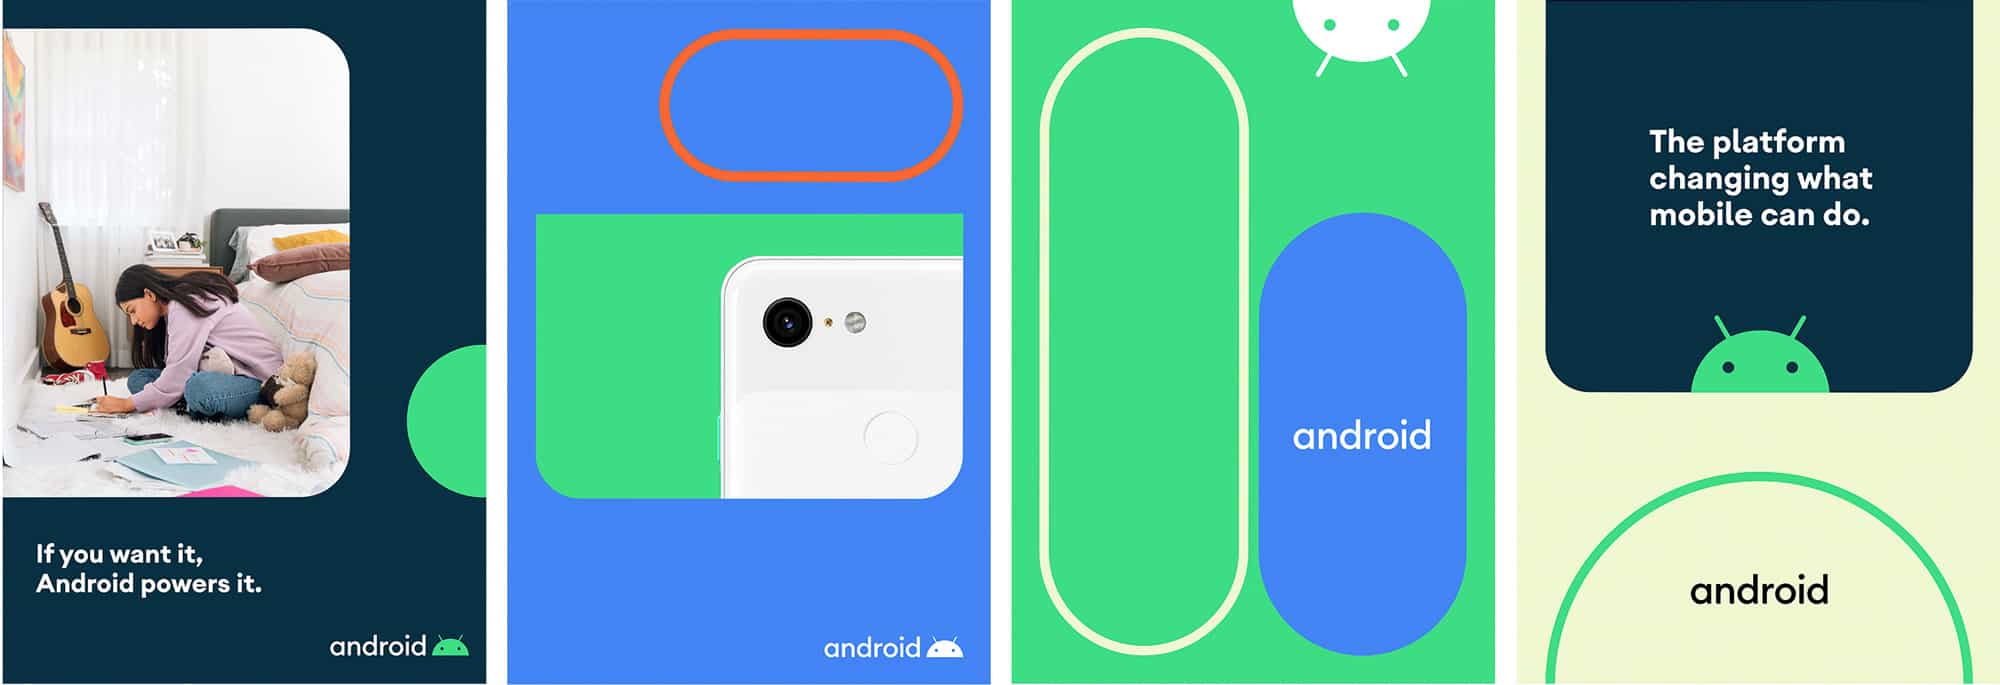 New Logo and Identity for Android by Huge 10